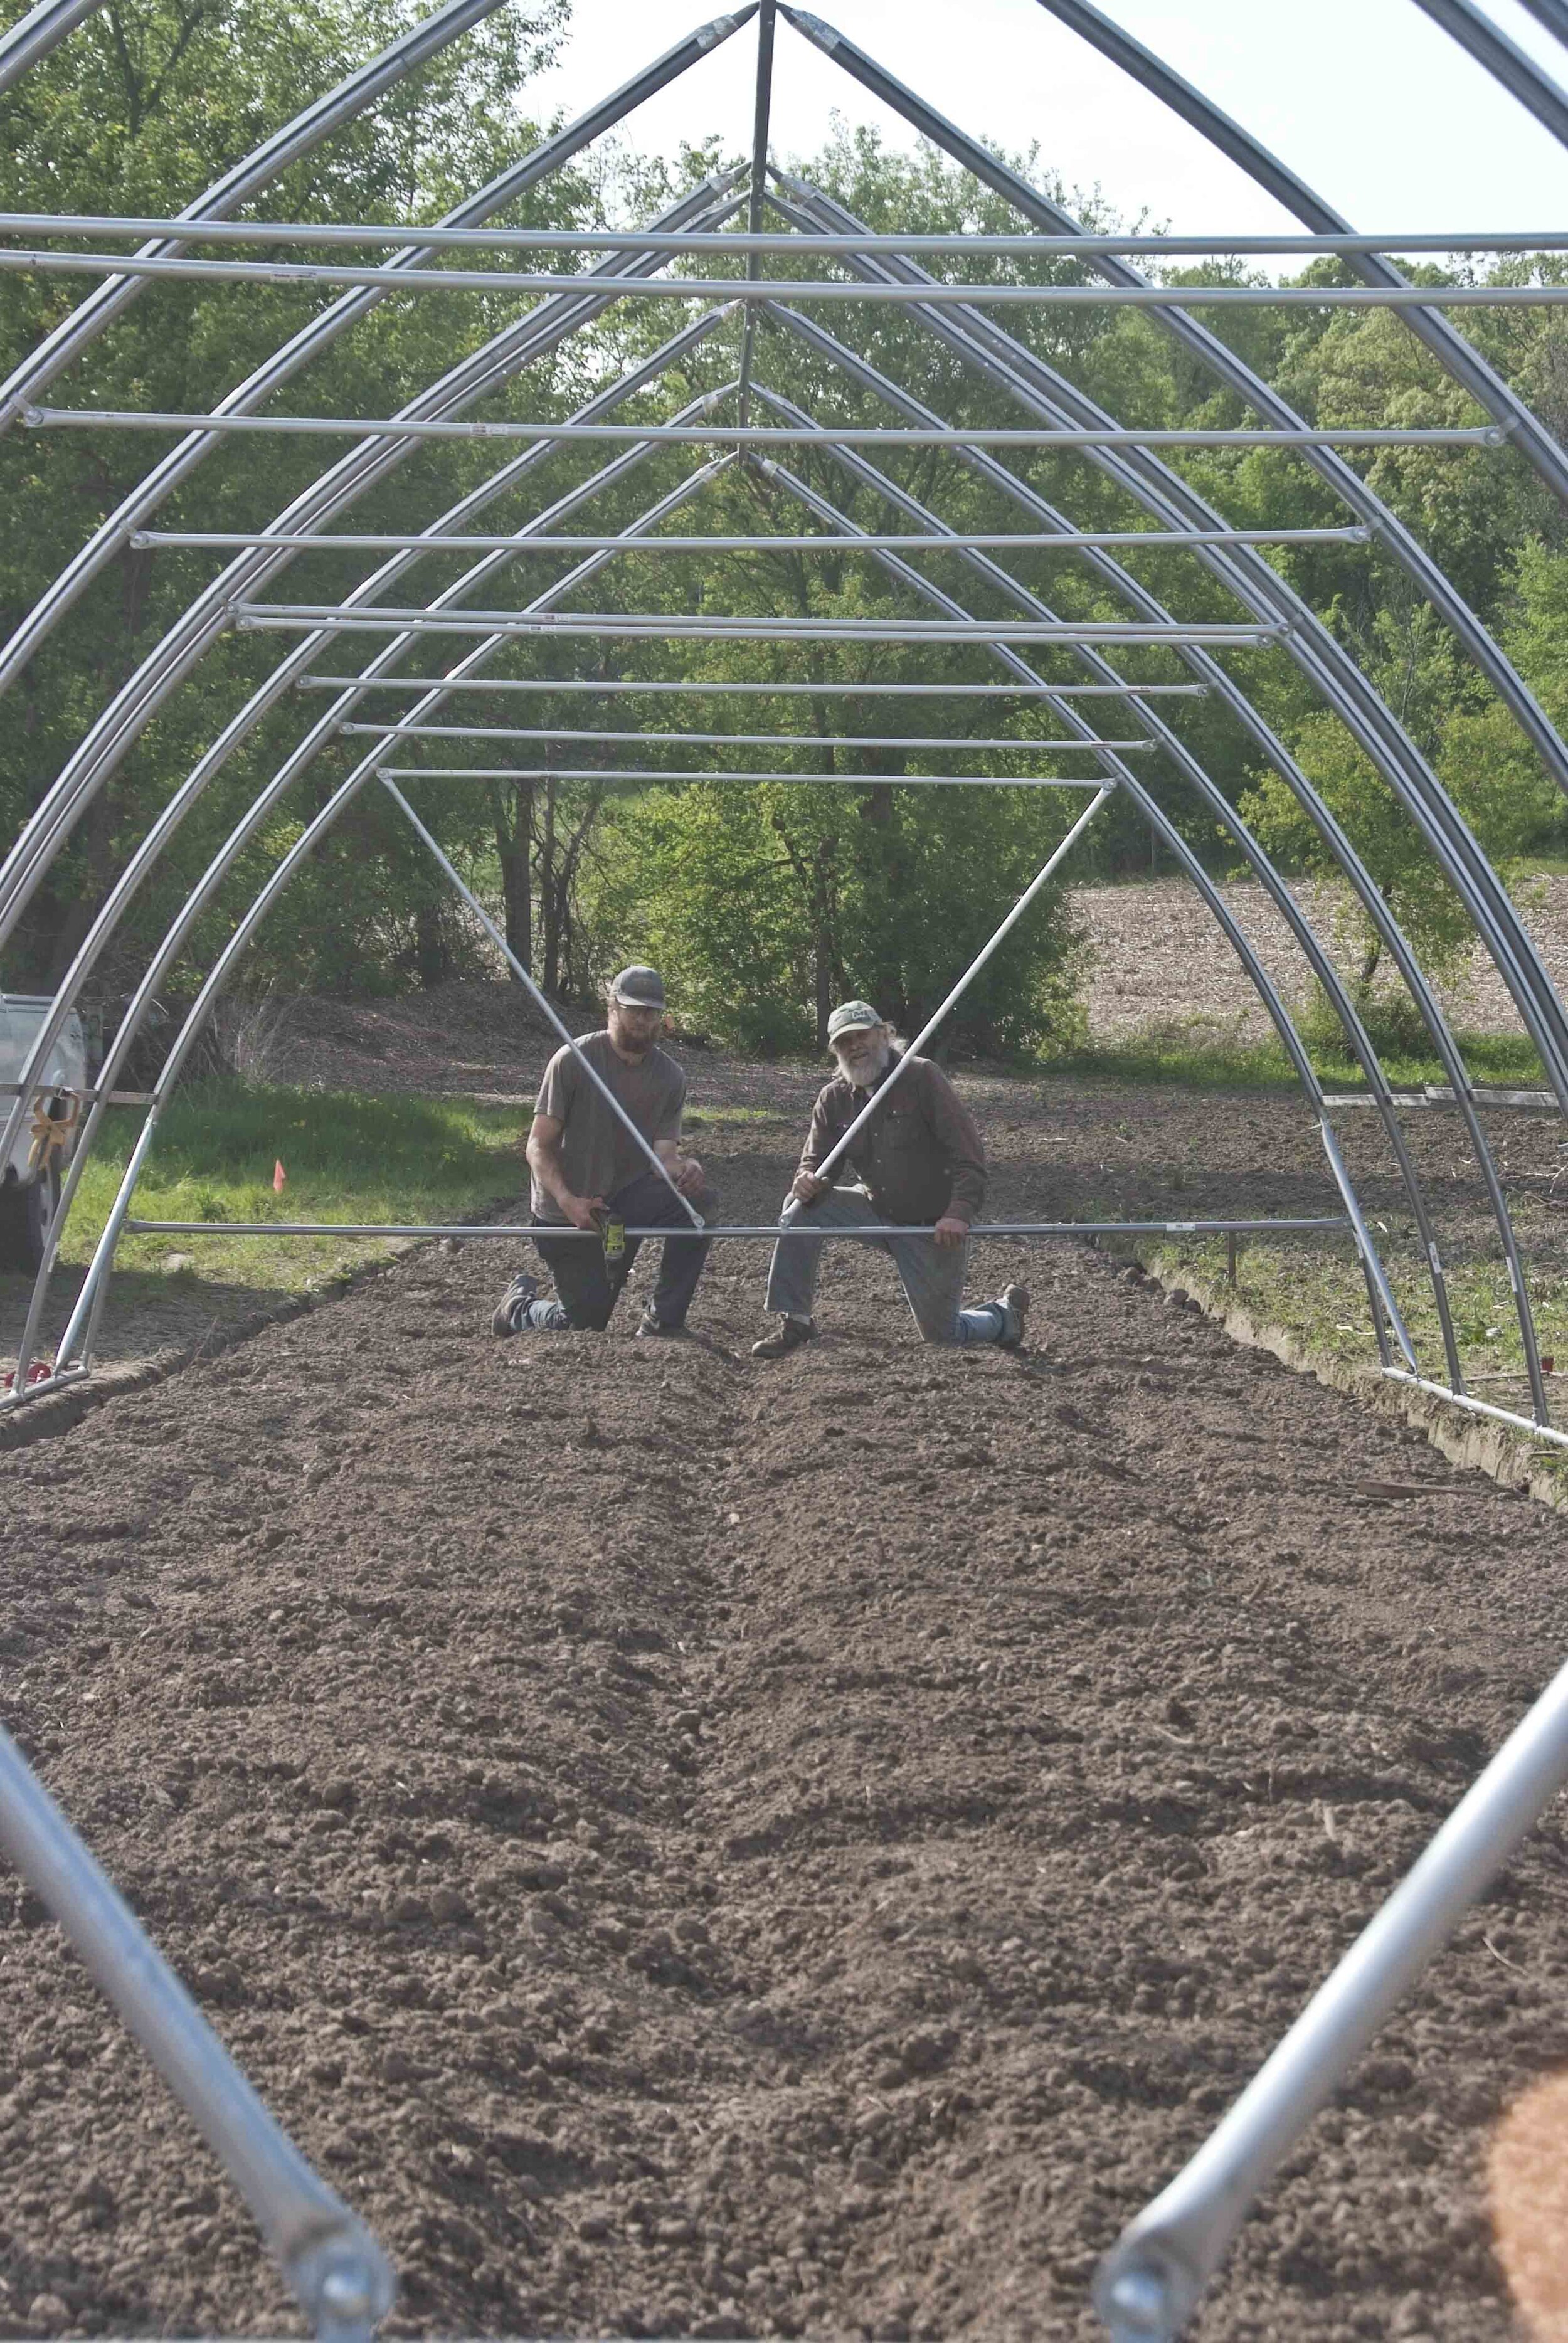 Two people planting in field